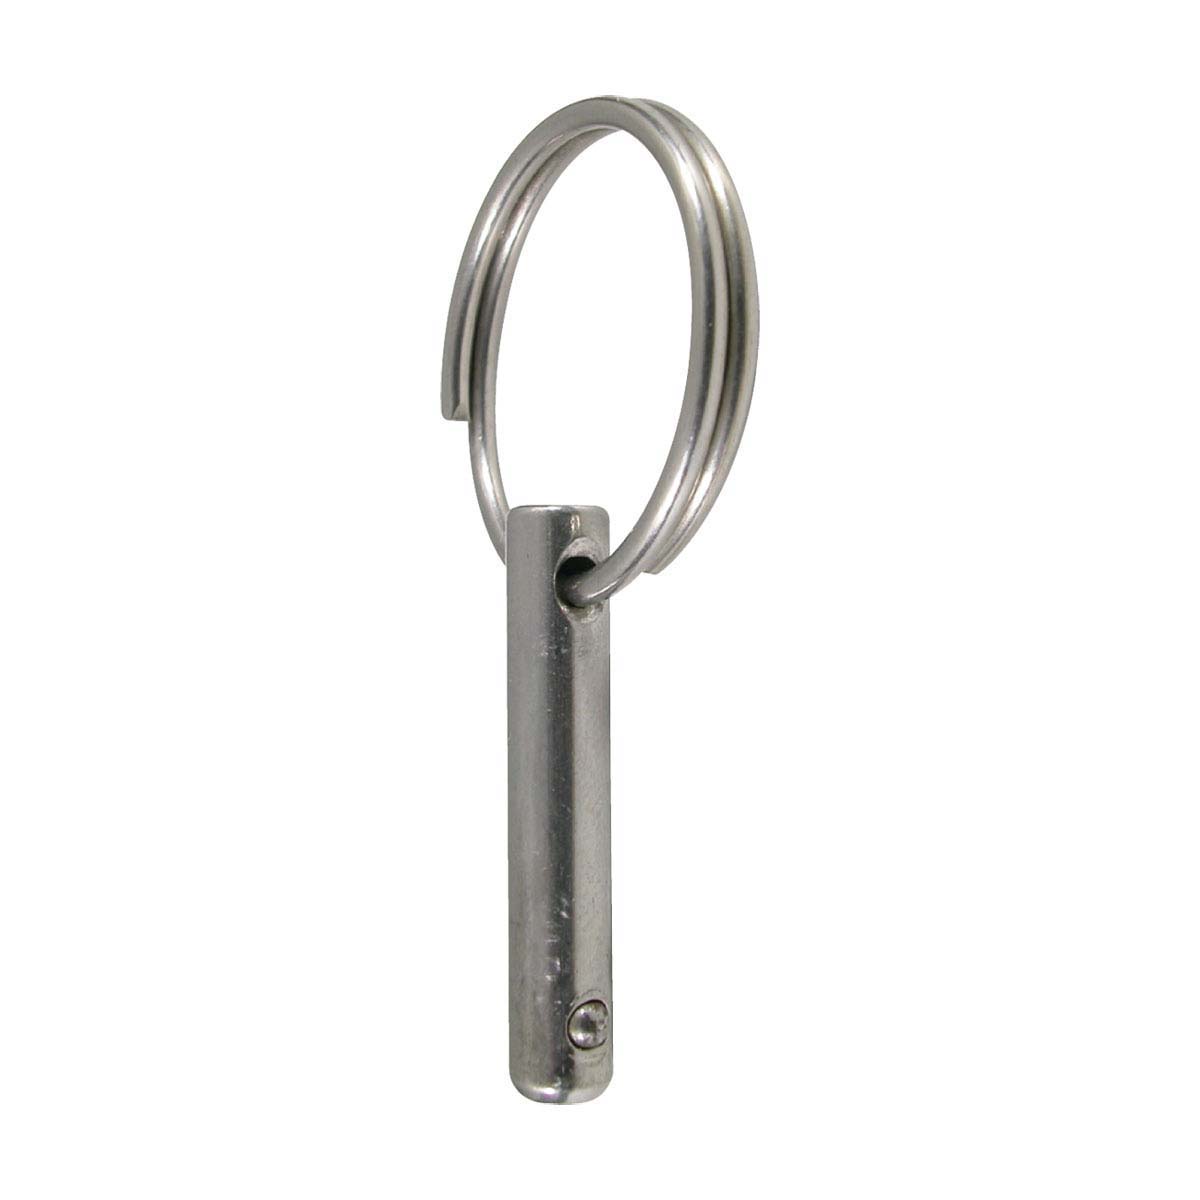 "BLA 316 Stainless Steel Quick Release Pin 1/4"" x 7/8"""